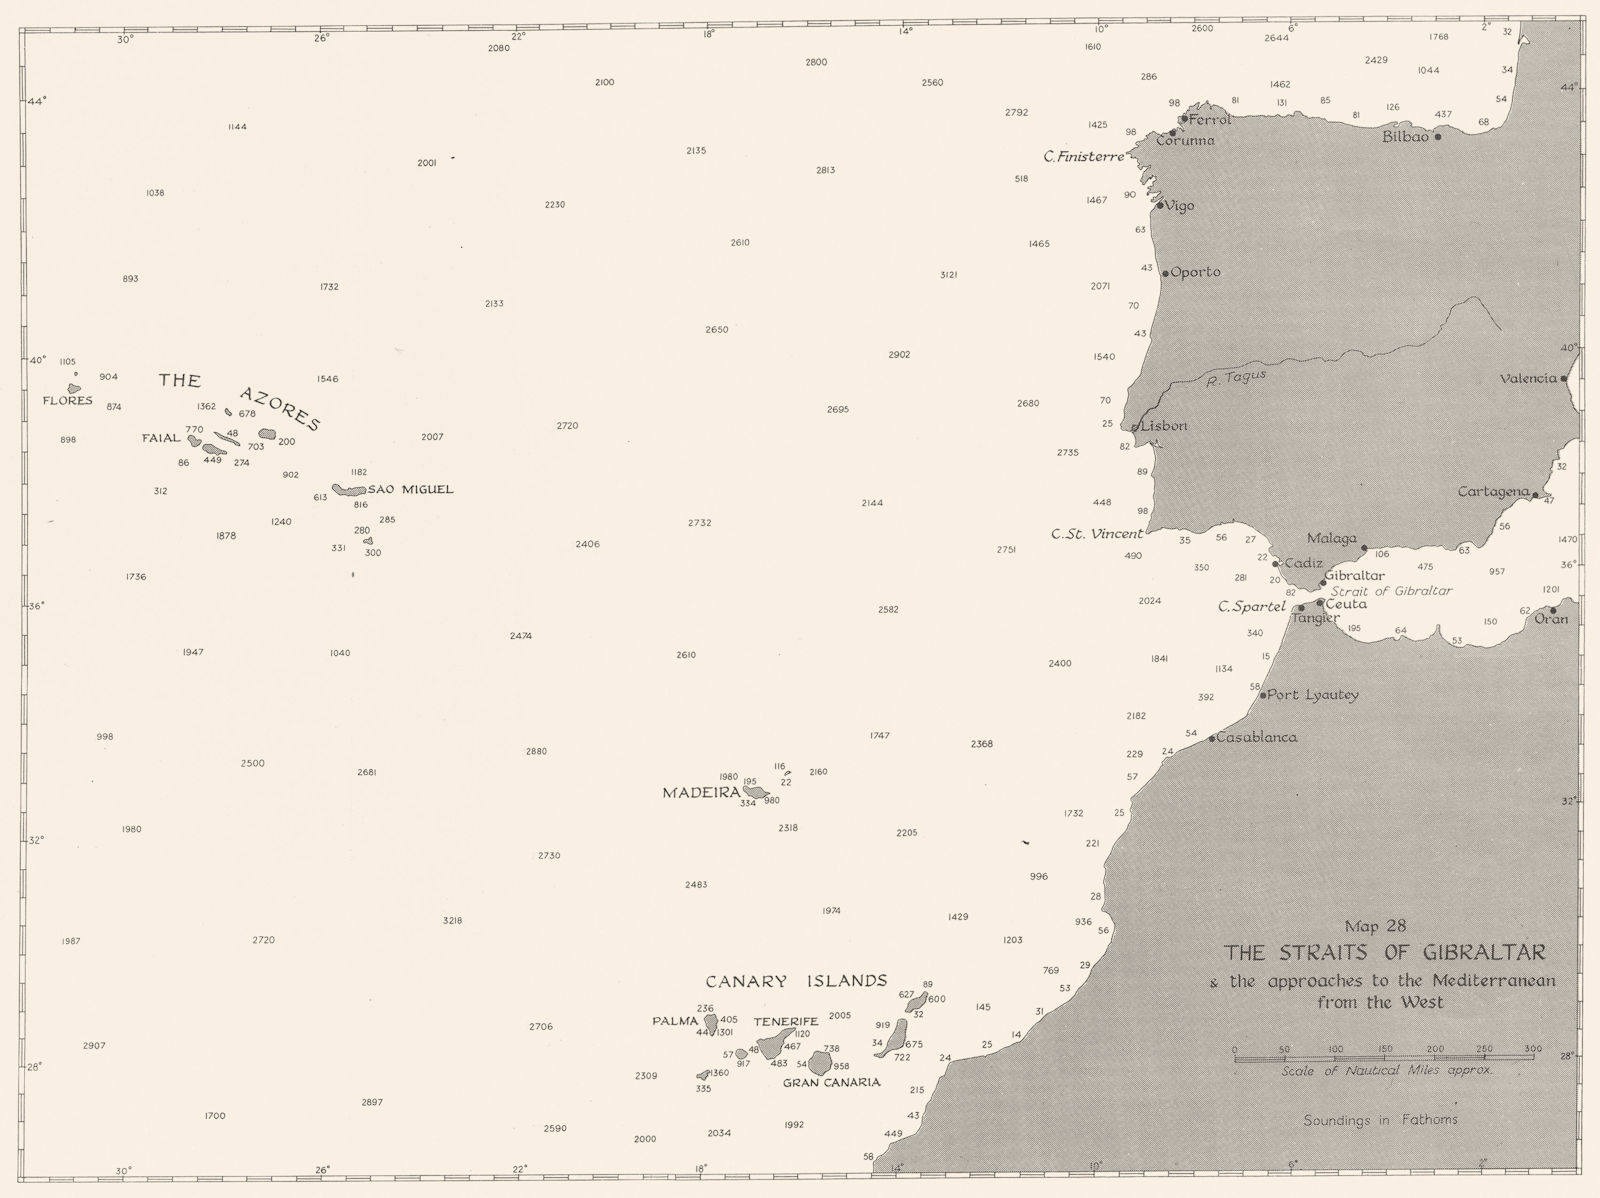 Associate Product GIBRALTAR. Jan-May 1941. Straits of & approaches to Mediterranean west 1954 map